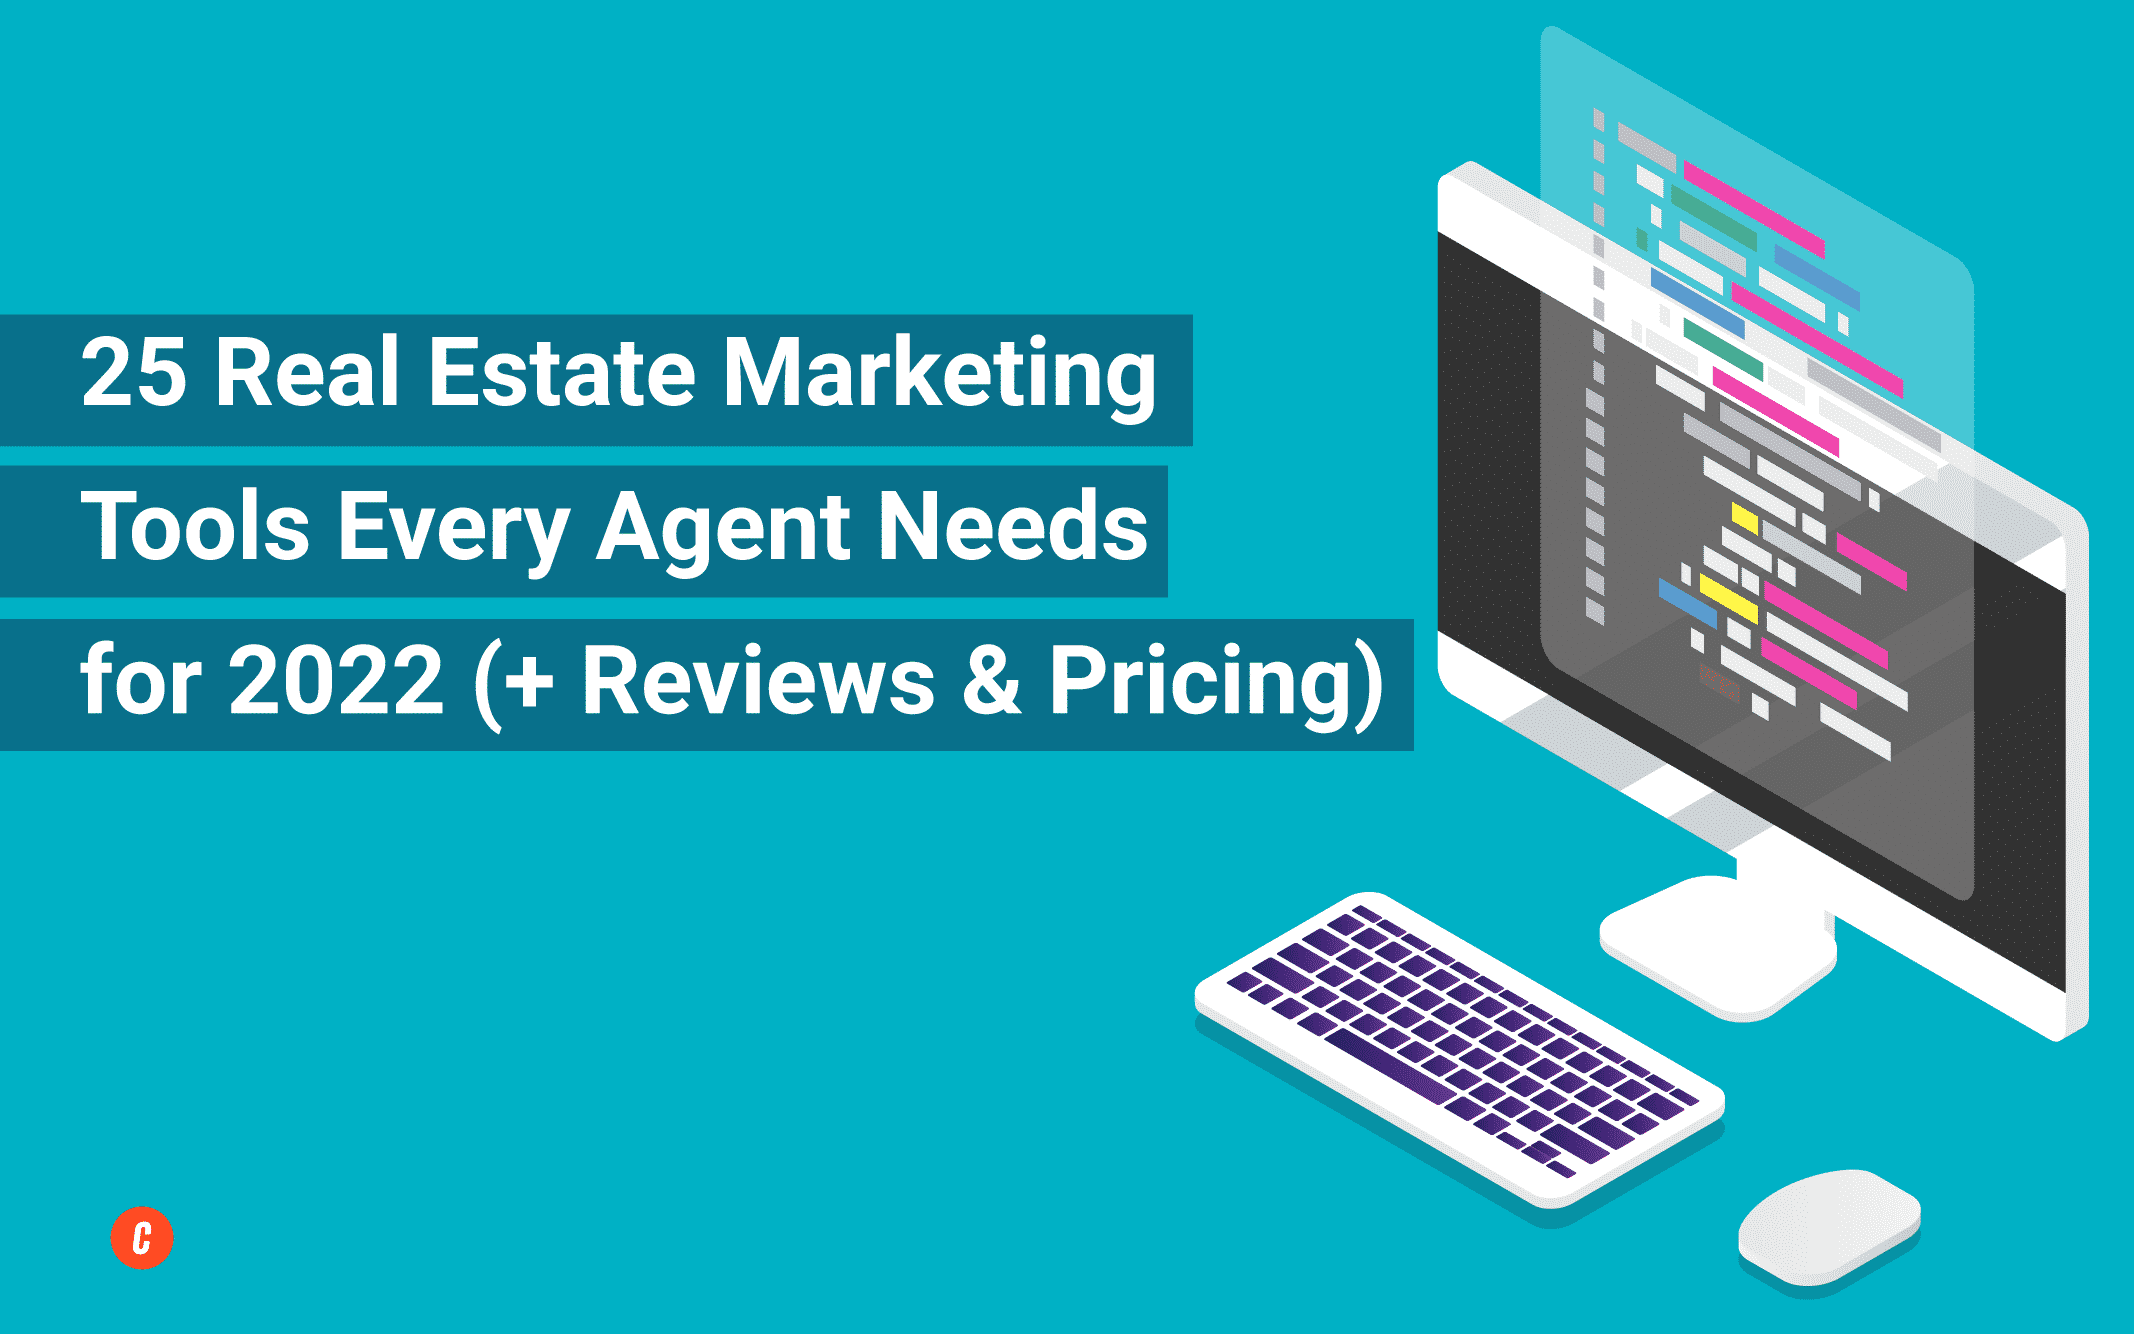 25 Real Estate Marketing Tools Every Agent Needs for 2022 (+ Reviews & Pricing)